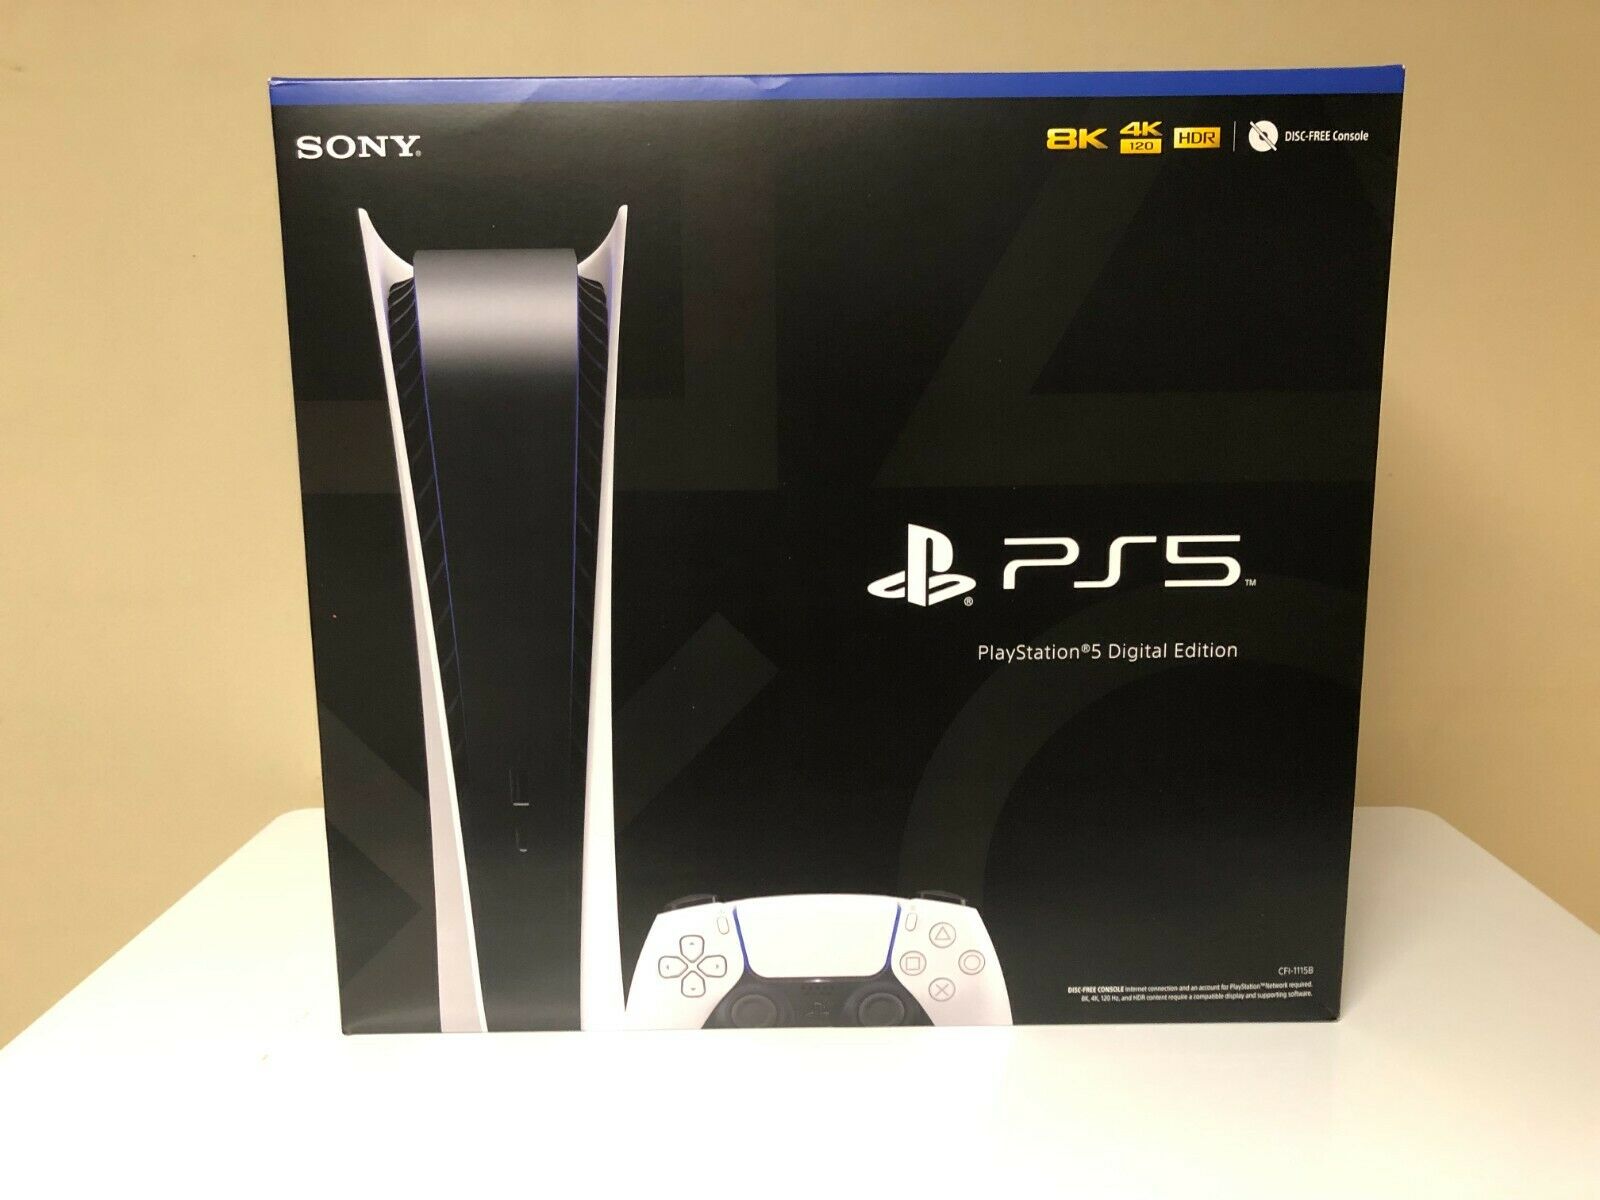 New sony playstation 5 (ps5) console - digital edition